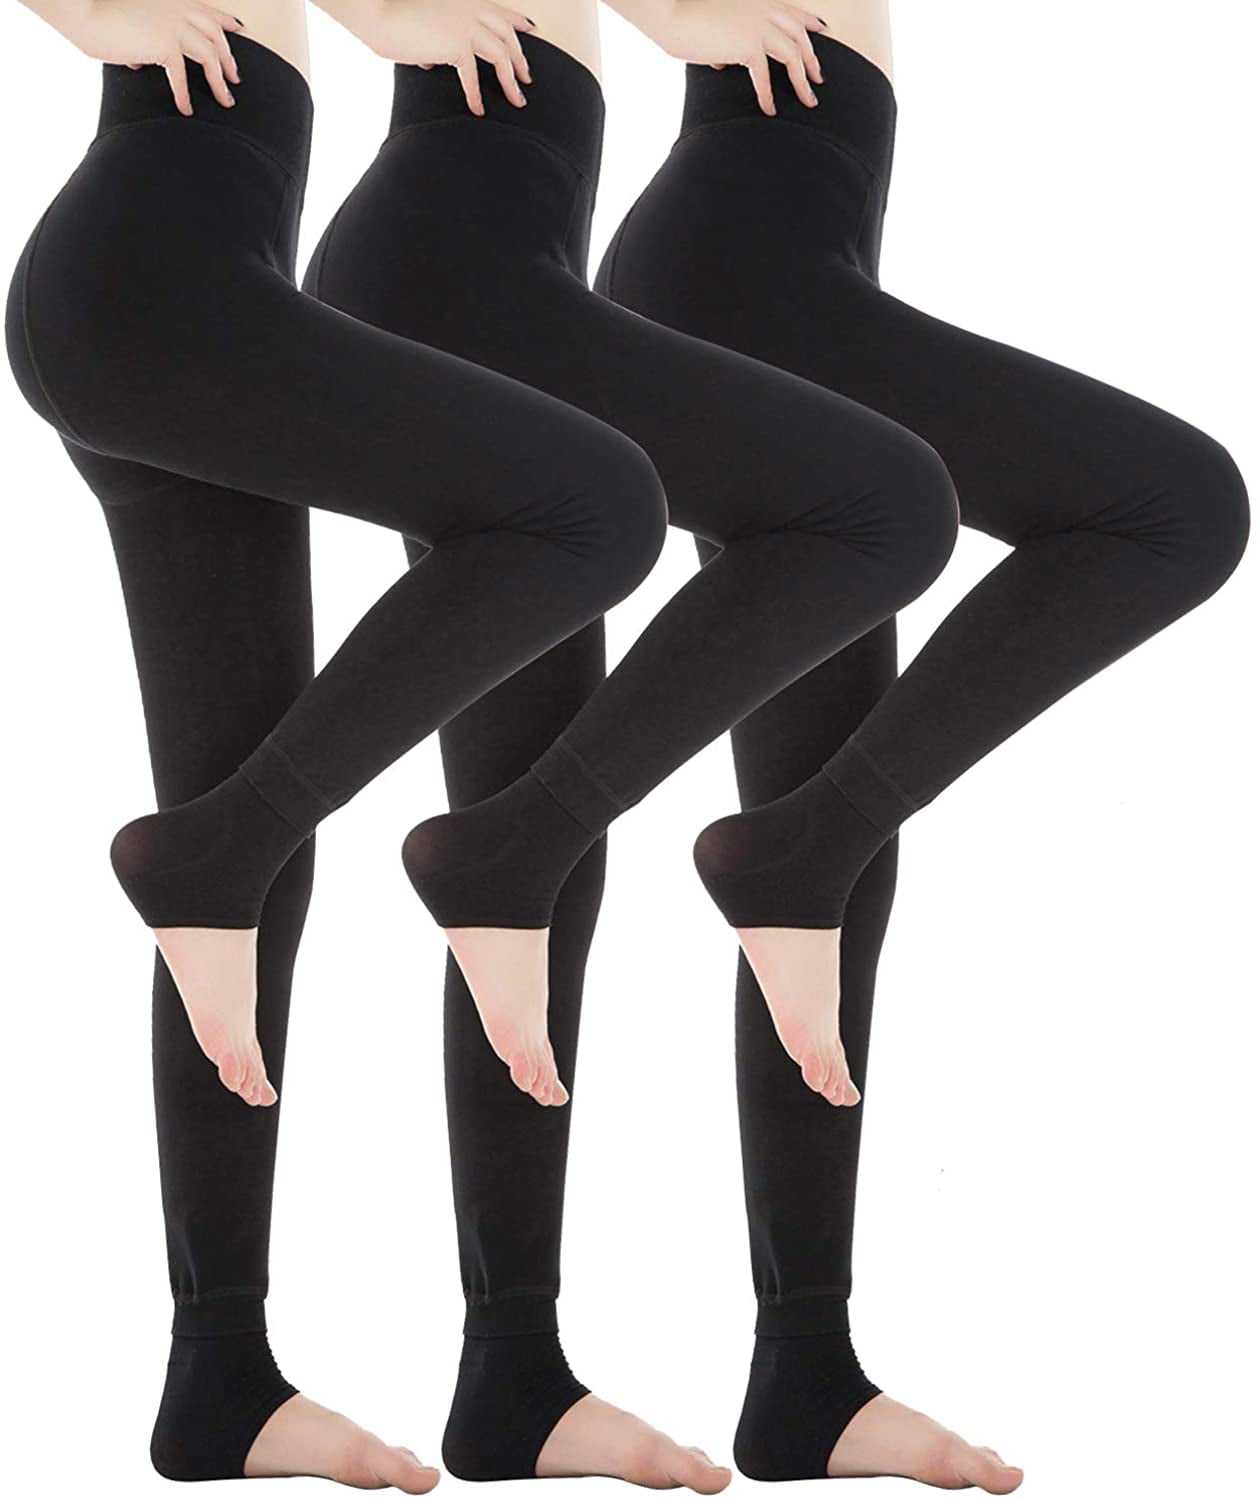 3 Pack Fleece Lined Leggings Thick Soft Stretchy Slimming Winter Warm Leggings 